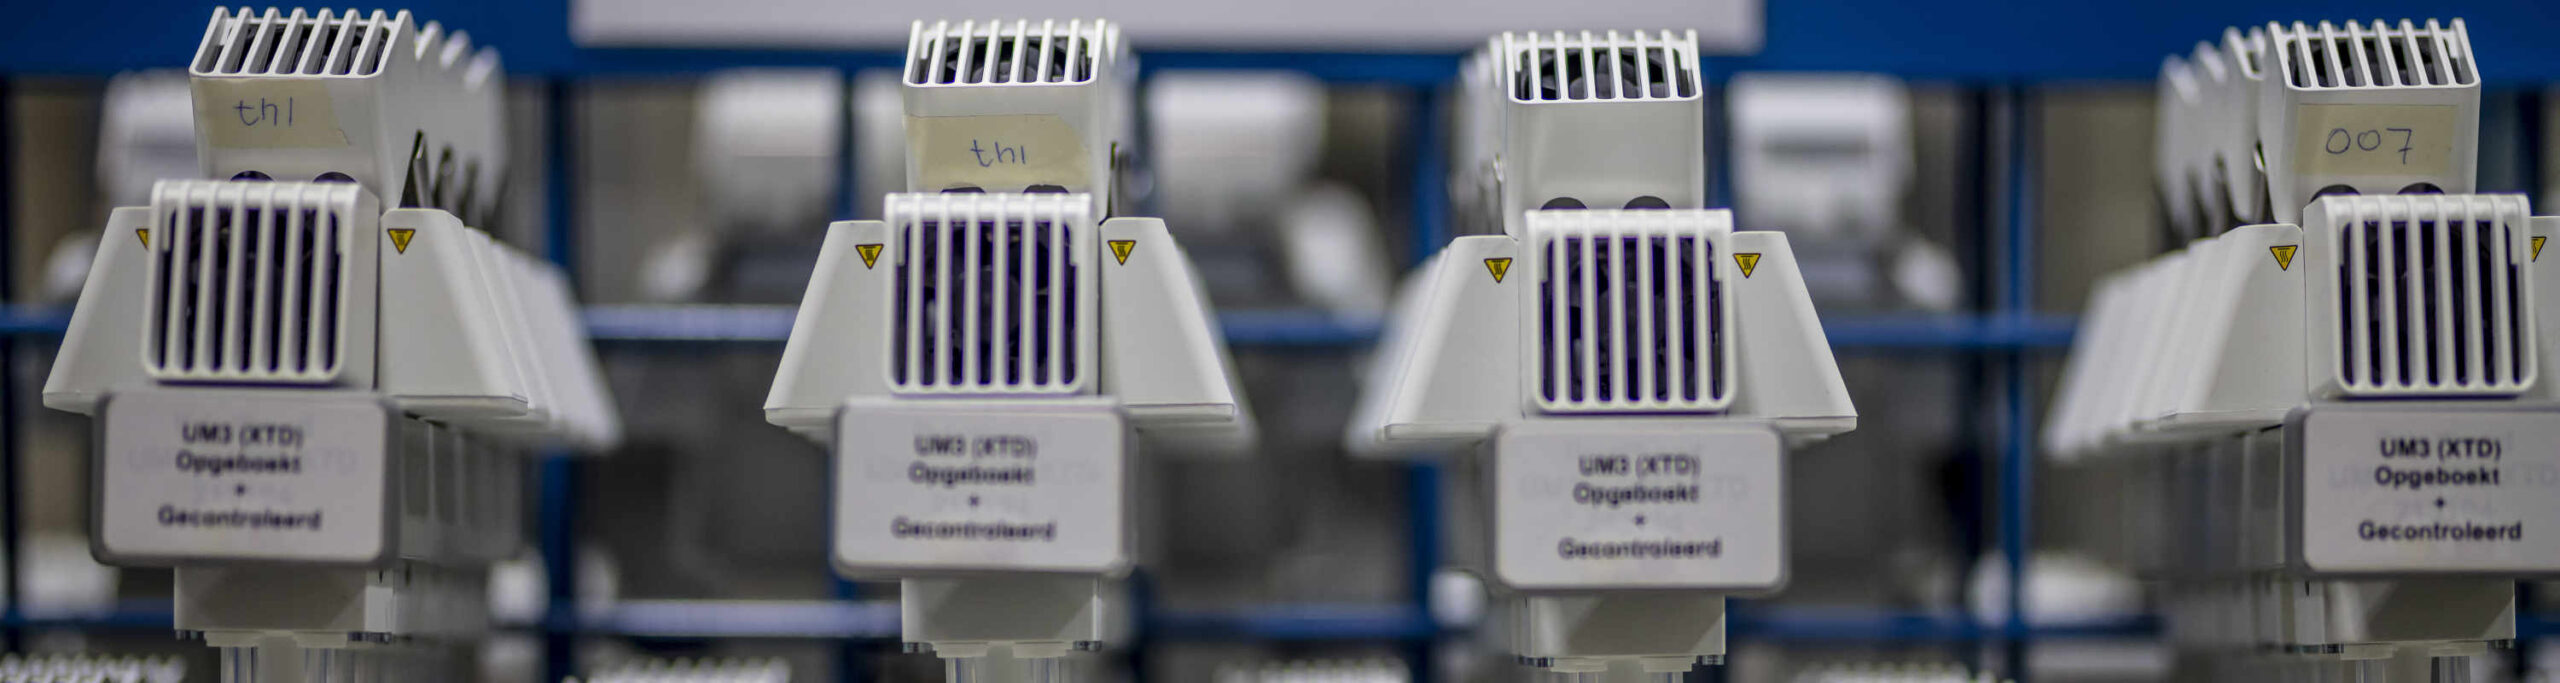 Application stories: Behind the scenes at the Ultimaker production line